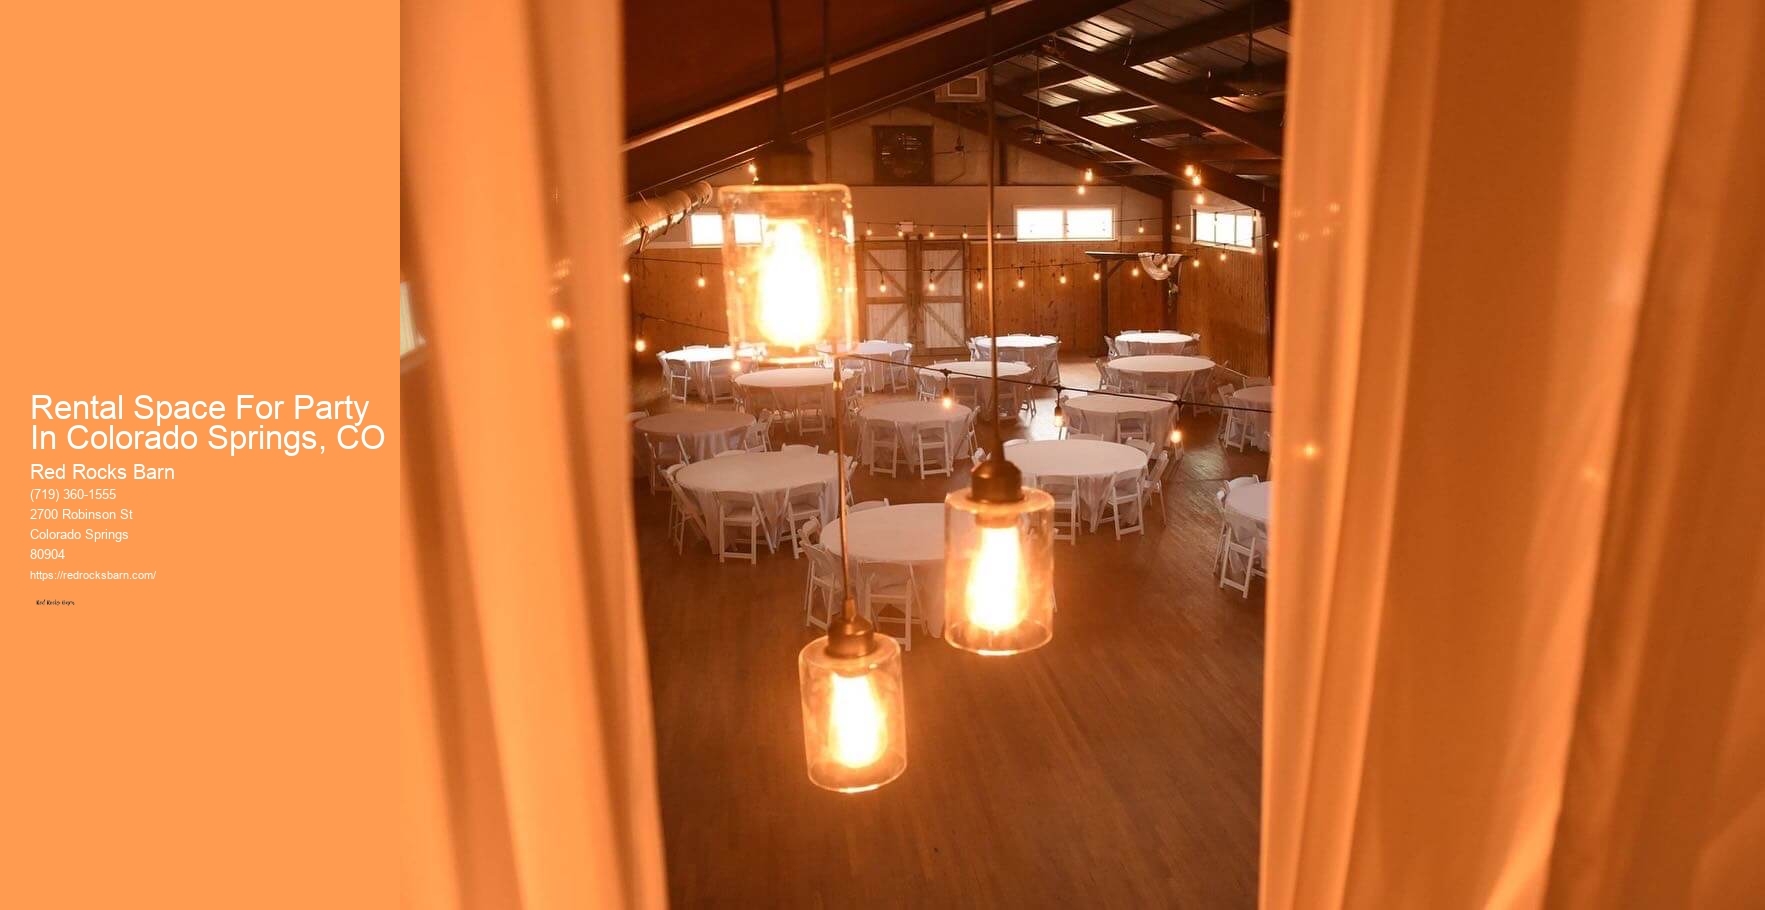 Rental Space For Party In Colorado Springs, CO